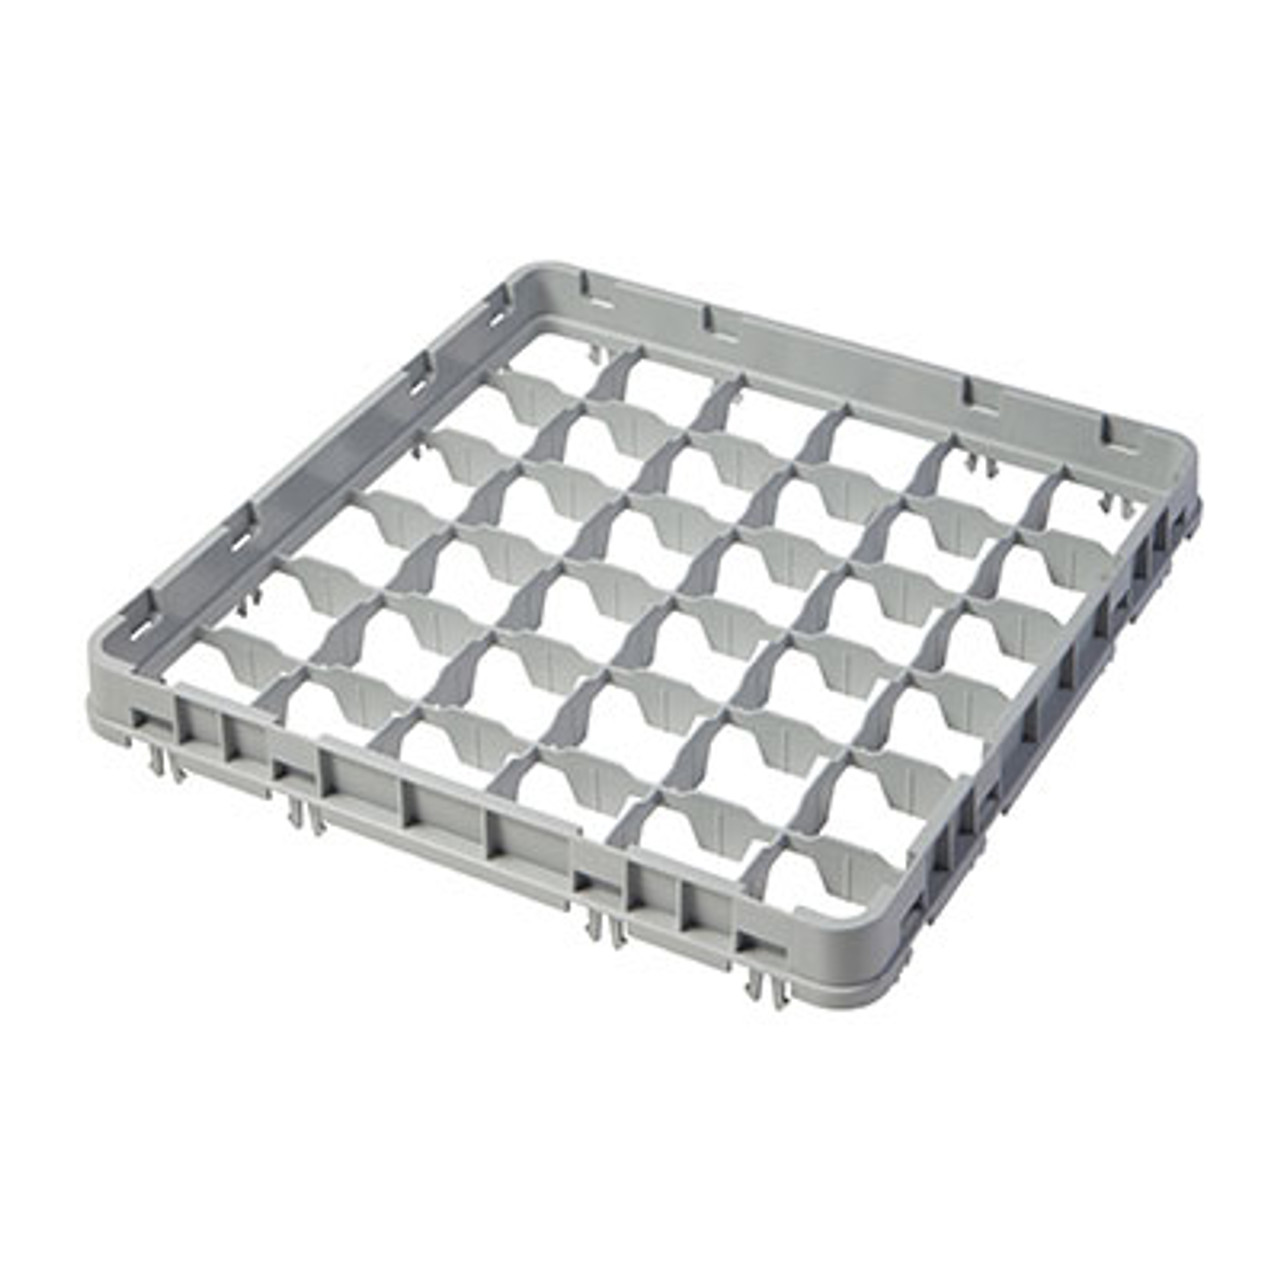 https://cdn11.bigcommerce.com/s-g3i86bef61/images/stencil/1280x1280/products/698/2958/Cambro-36E2151-Dishwasher-Rack-Extender__91033.1665173429.jpg?c=1